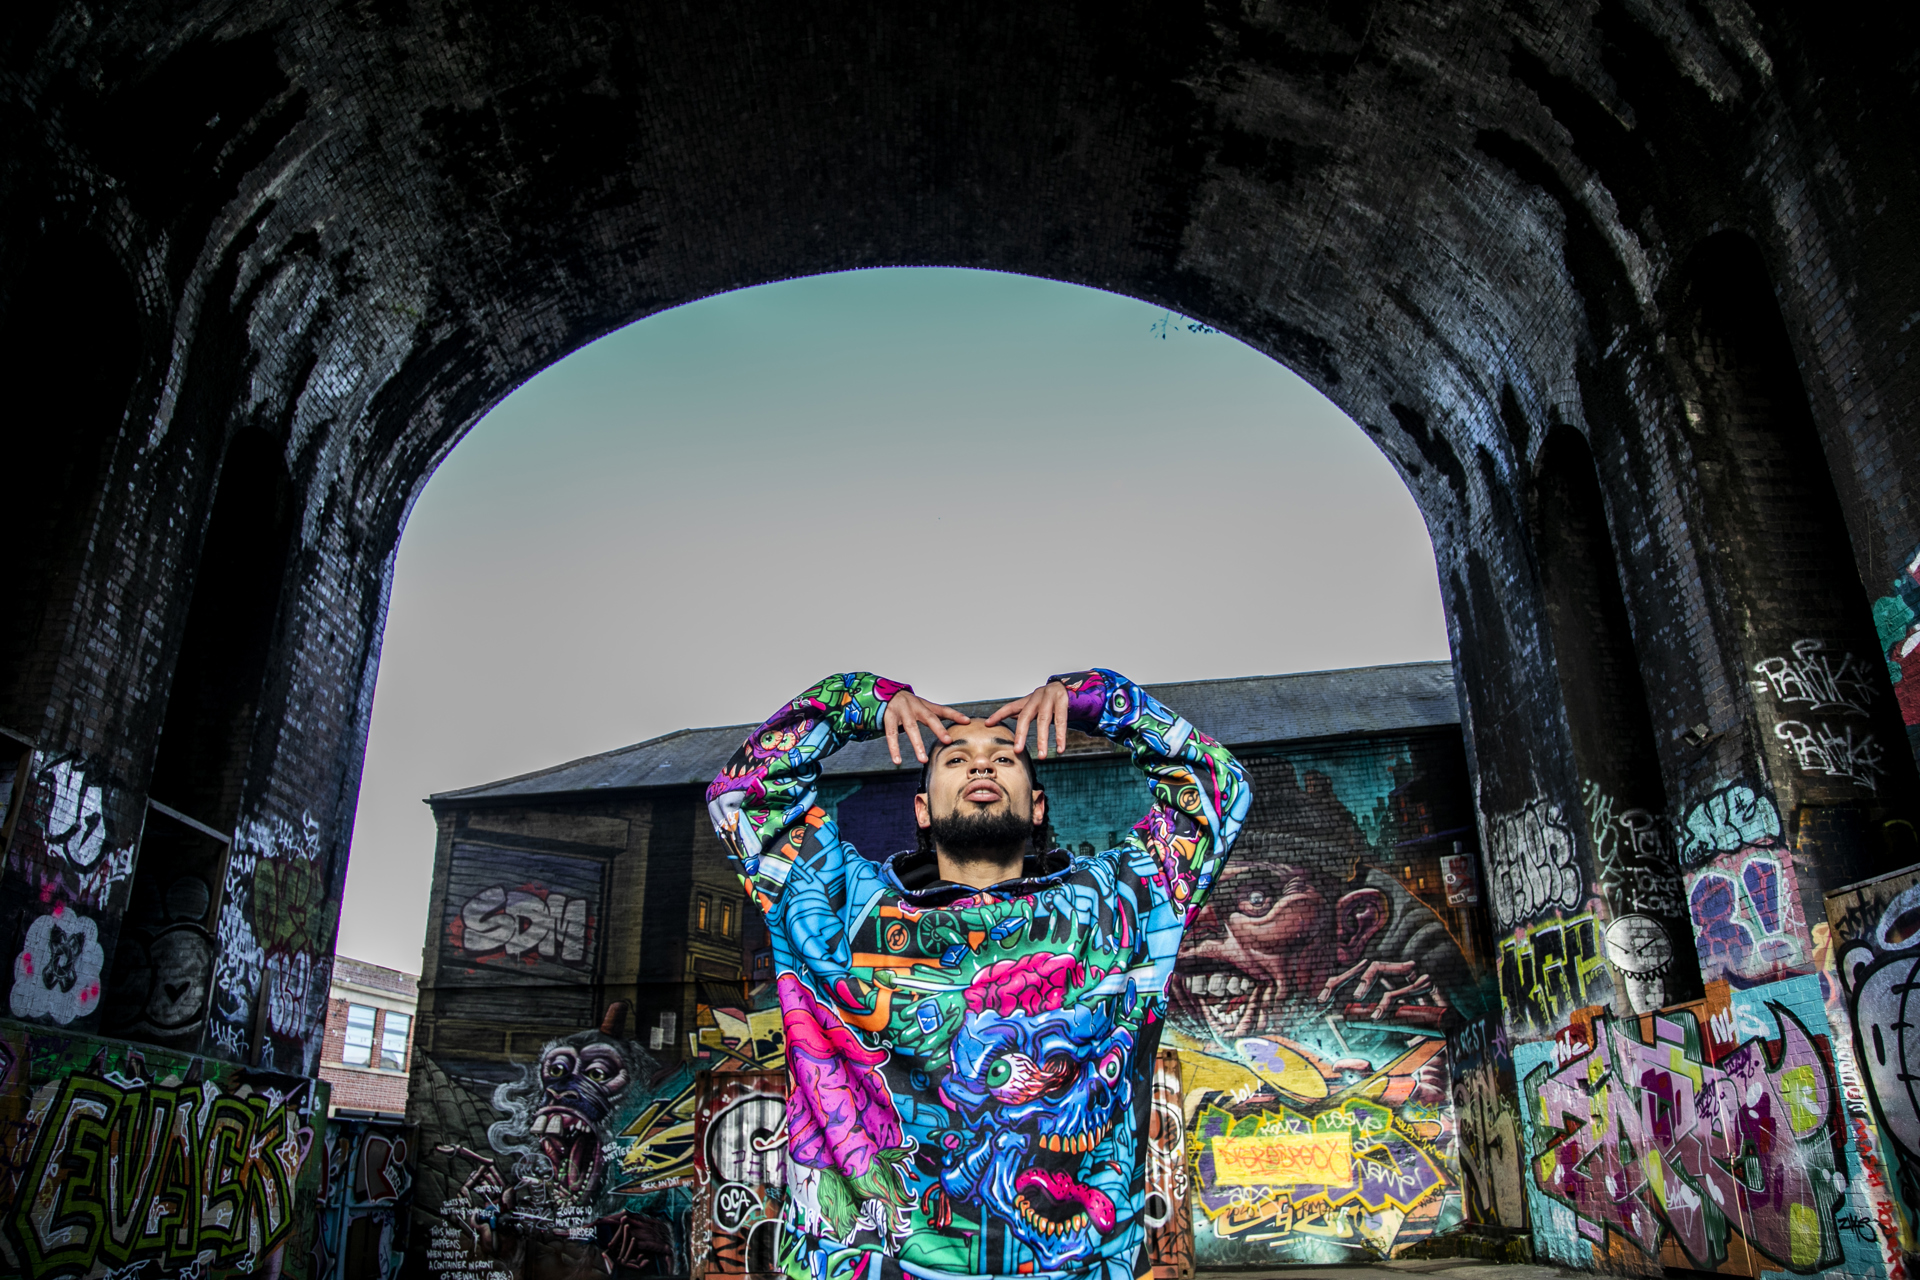 Global majority male dancer with short dreads in colourful blue toned graffiti jumper. with arm in a M shape holding his face and looking up. In front of graffiti building in a large graffiti archway.